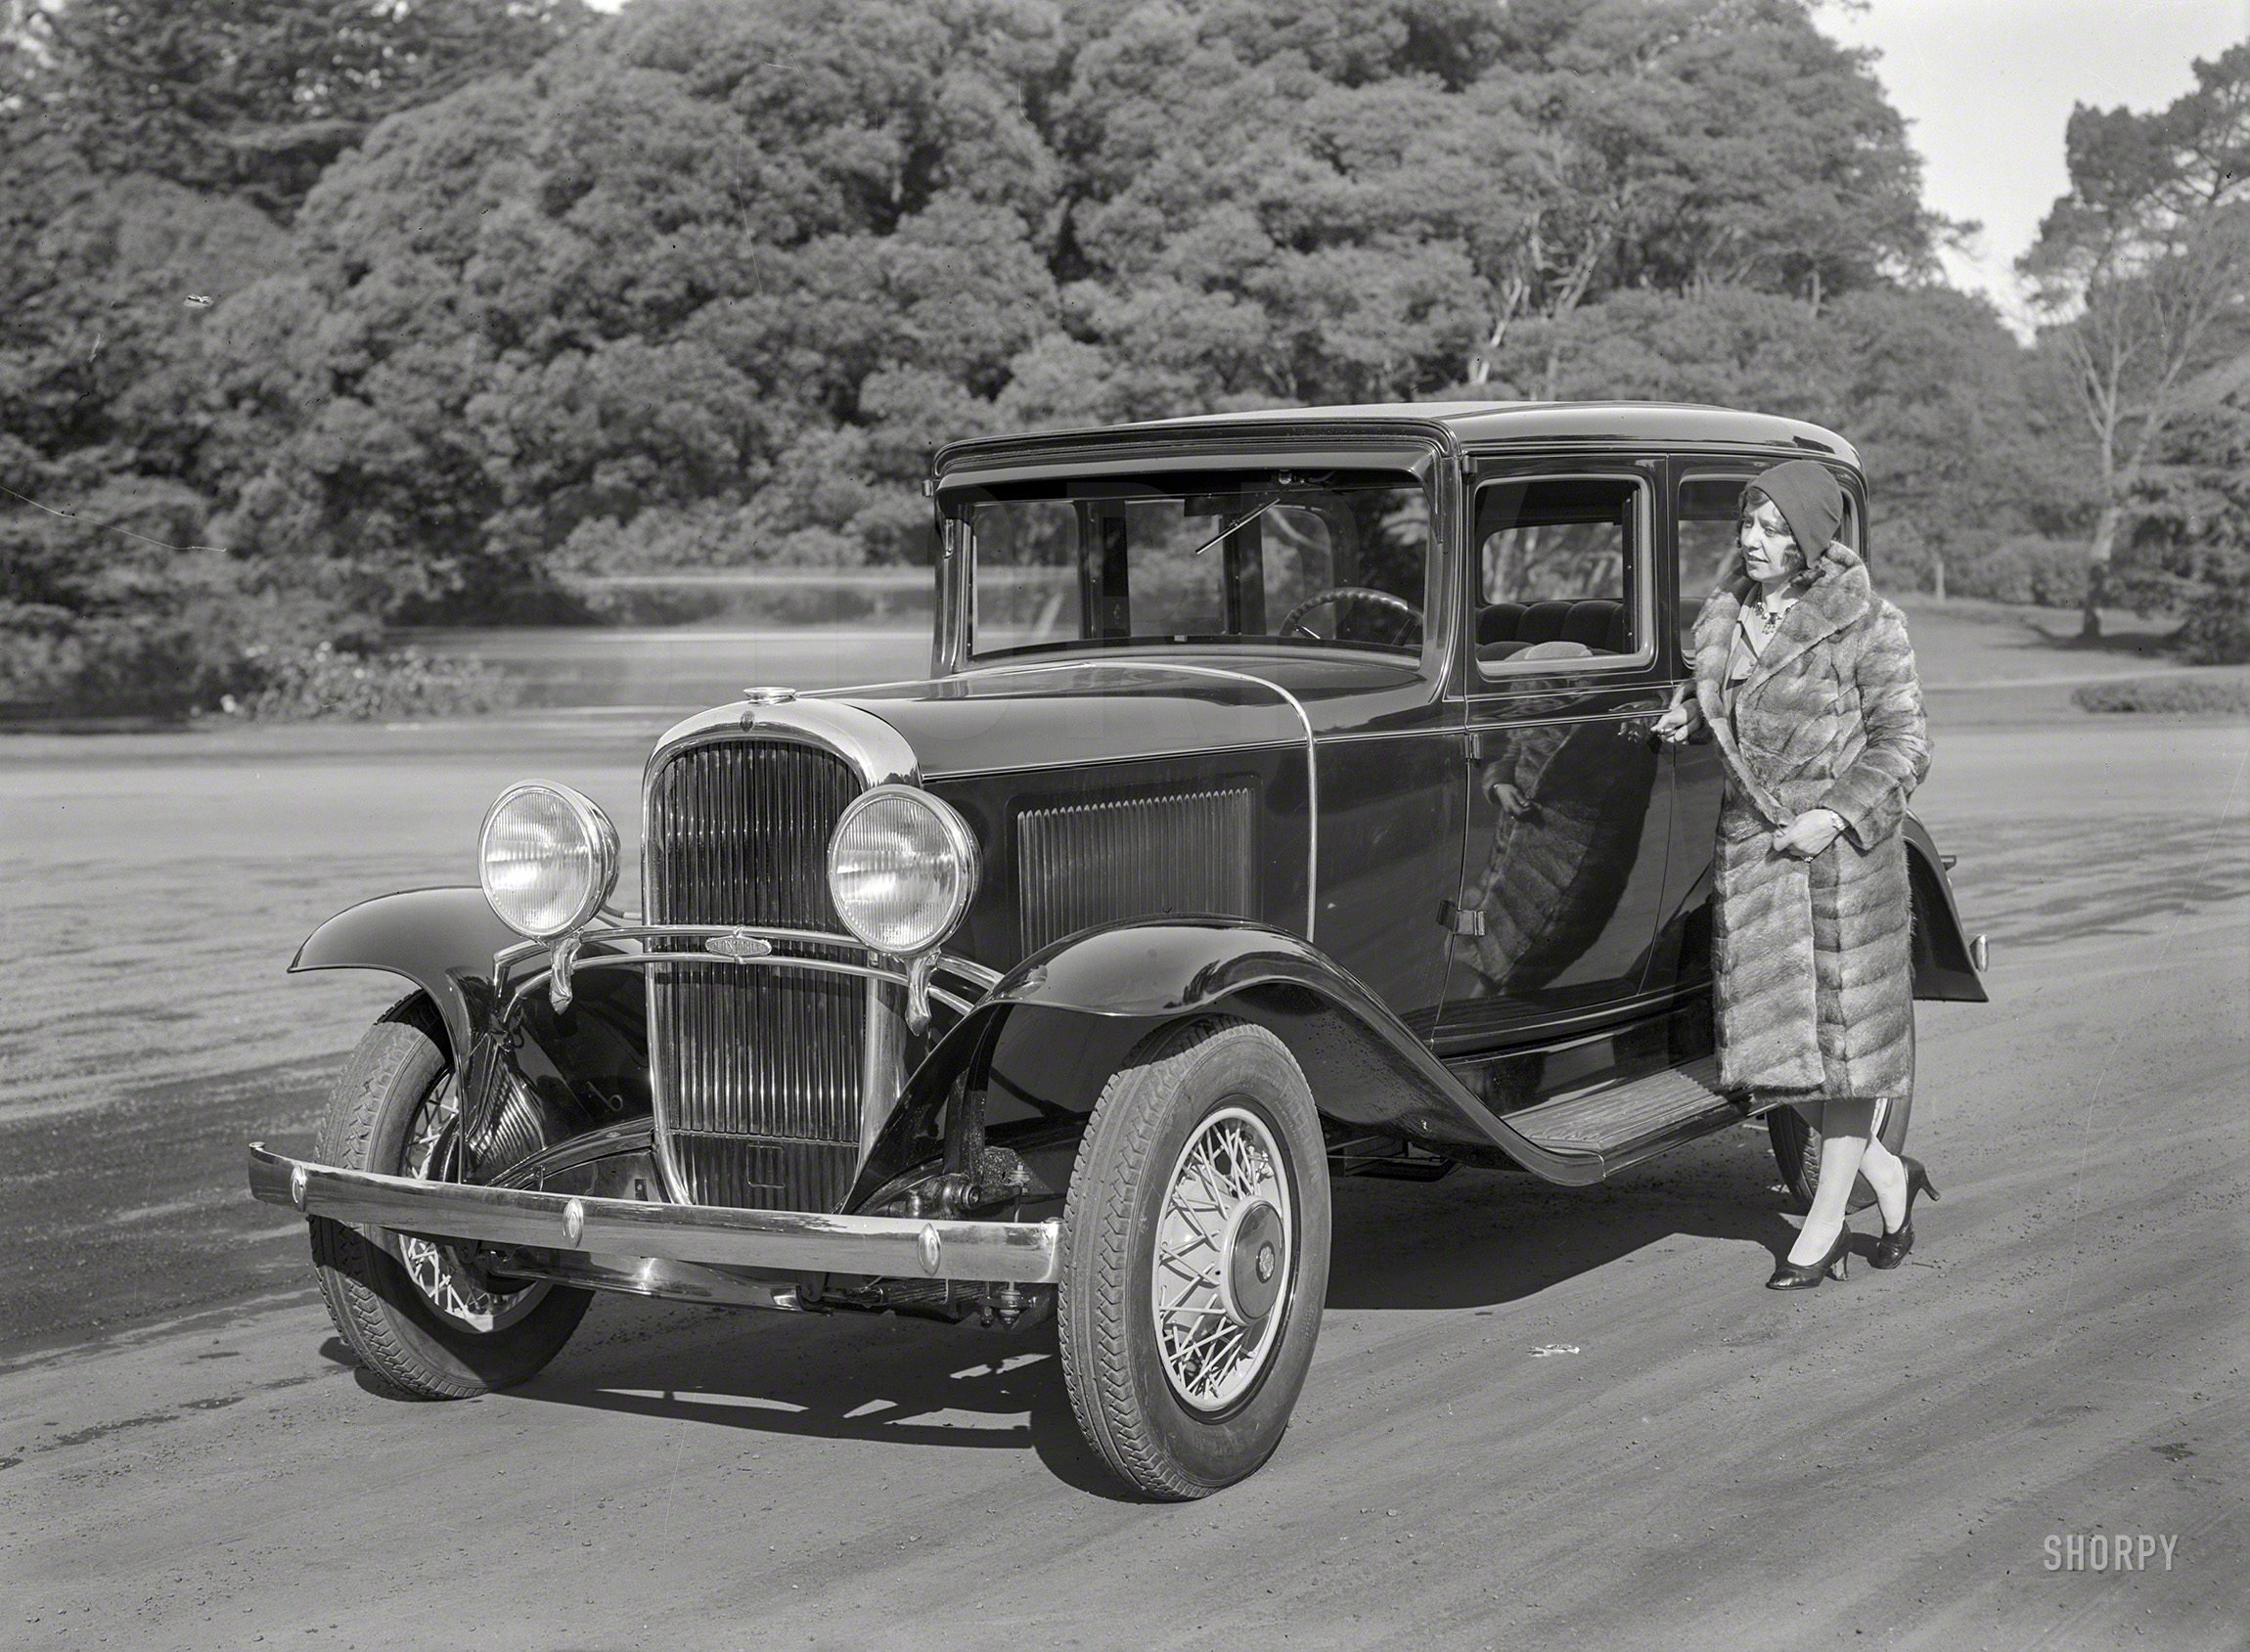 San Francisco, 1931. "Oldsmobile sedan." Latest entry in the Shorpy Compendium of Outré Autos. 5x7 glass negative by Christopher Helin. View full size.